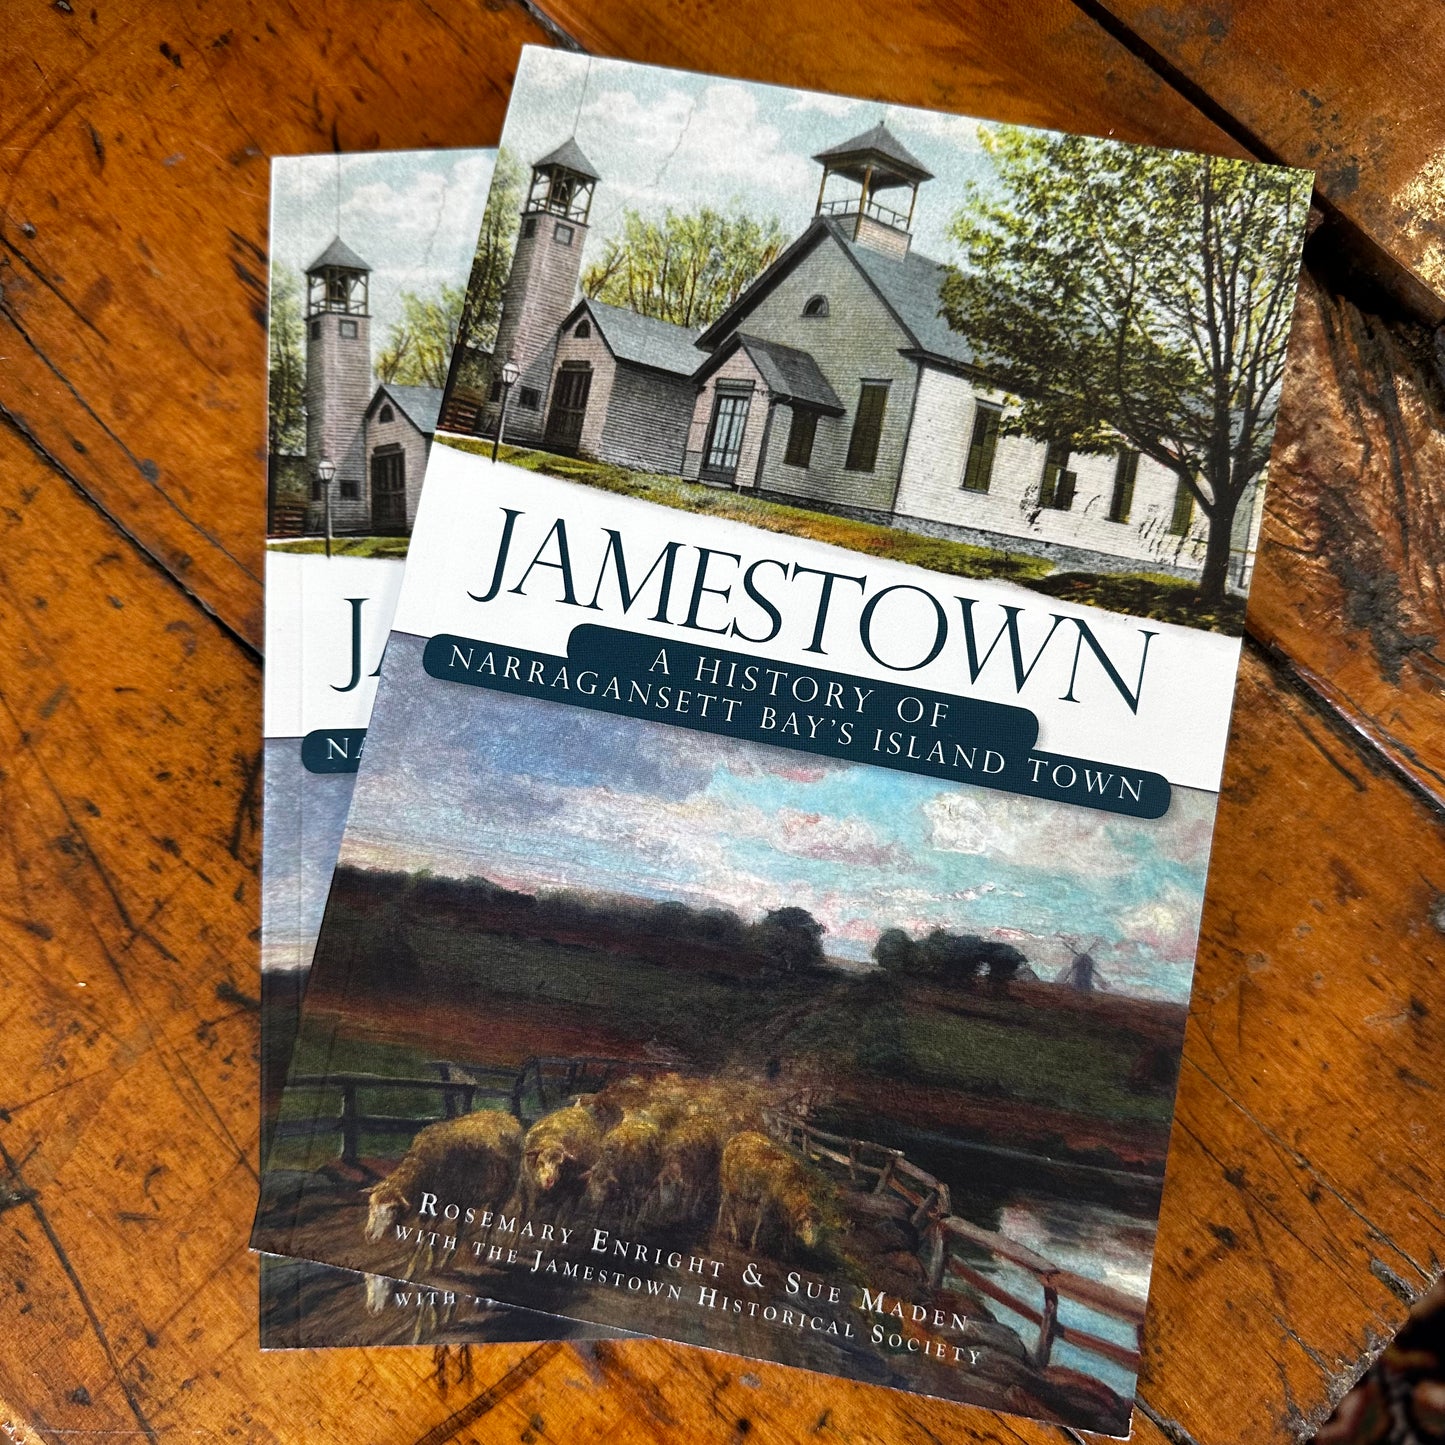 Jamestown: A History of Narragansett Bay’s Island Town by Sue Maden & Rosemary Enright